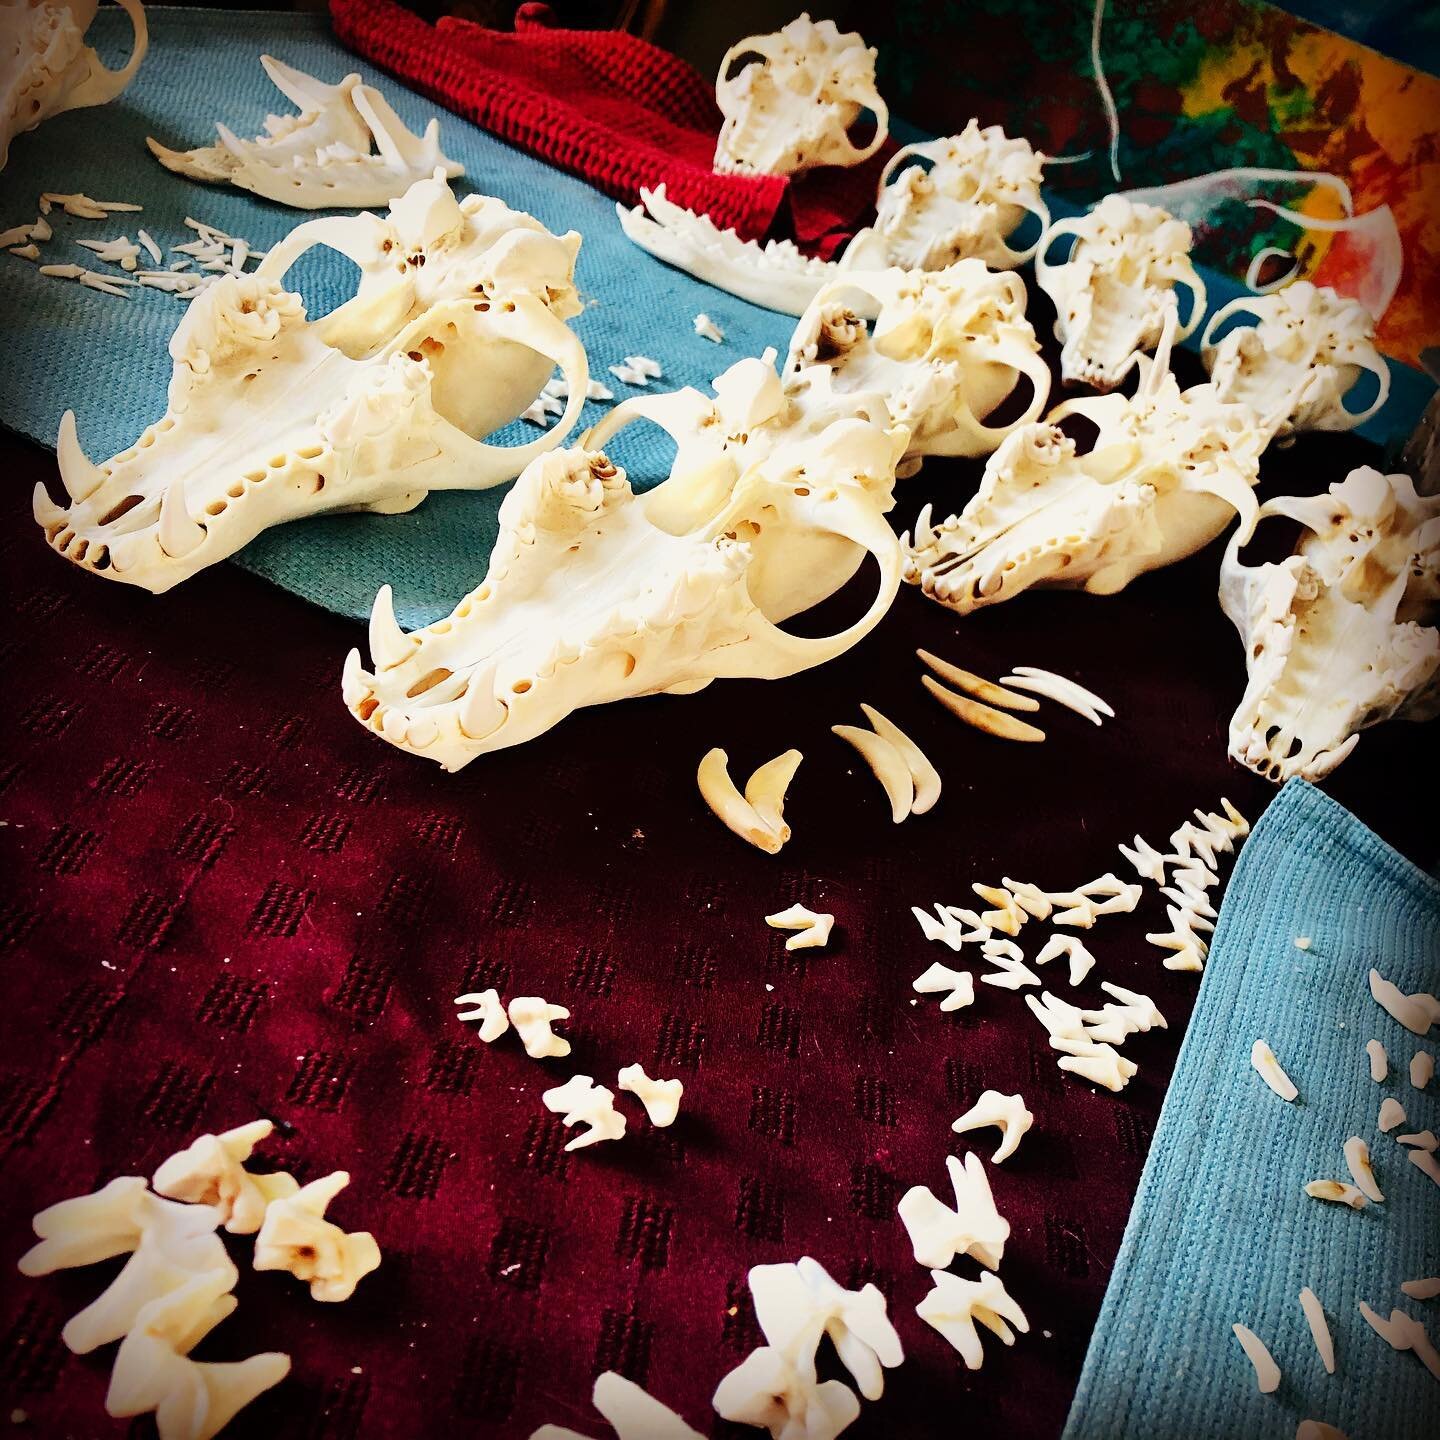 🧩 And the mission begins!!! ...teeth fell out while I was cleaning, and it all got mixed up.. 😞..now to puzzle them back together. 13 coyote skulls...
.
.
.
#puzzles #coyoteskull #coyoteteeth #assemblyrequired #bonecollector #odditiesandcuriosities